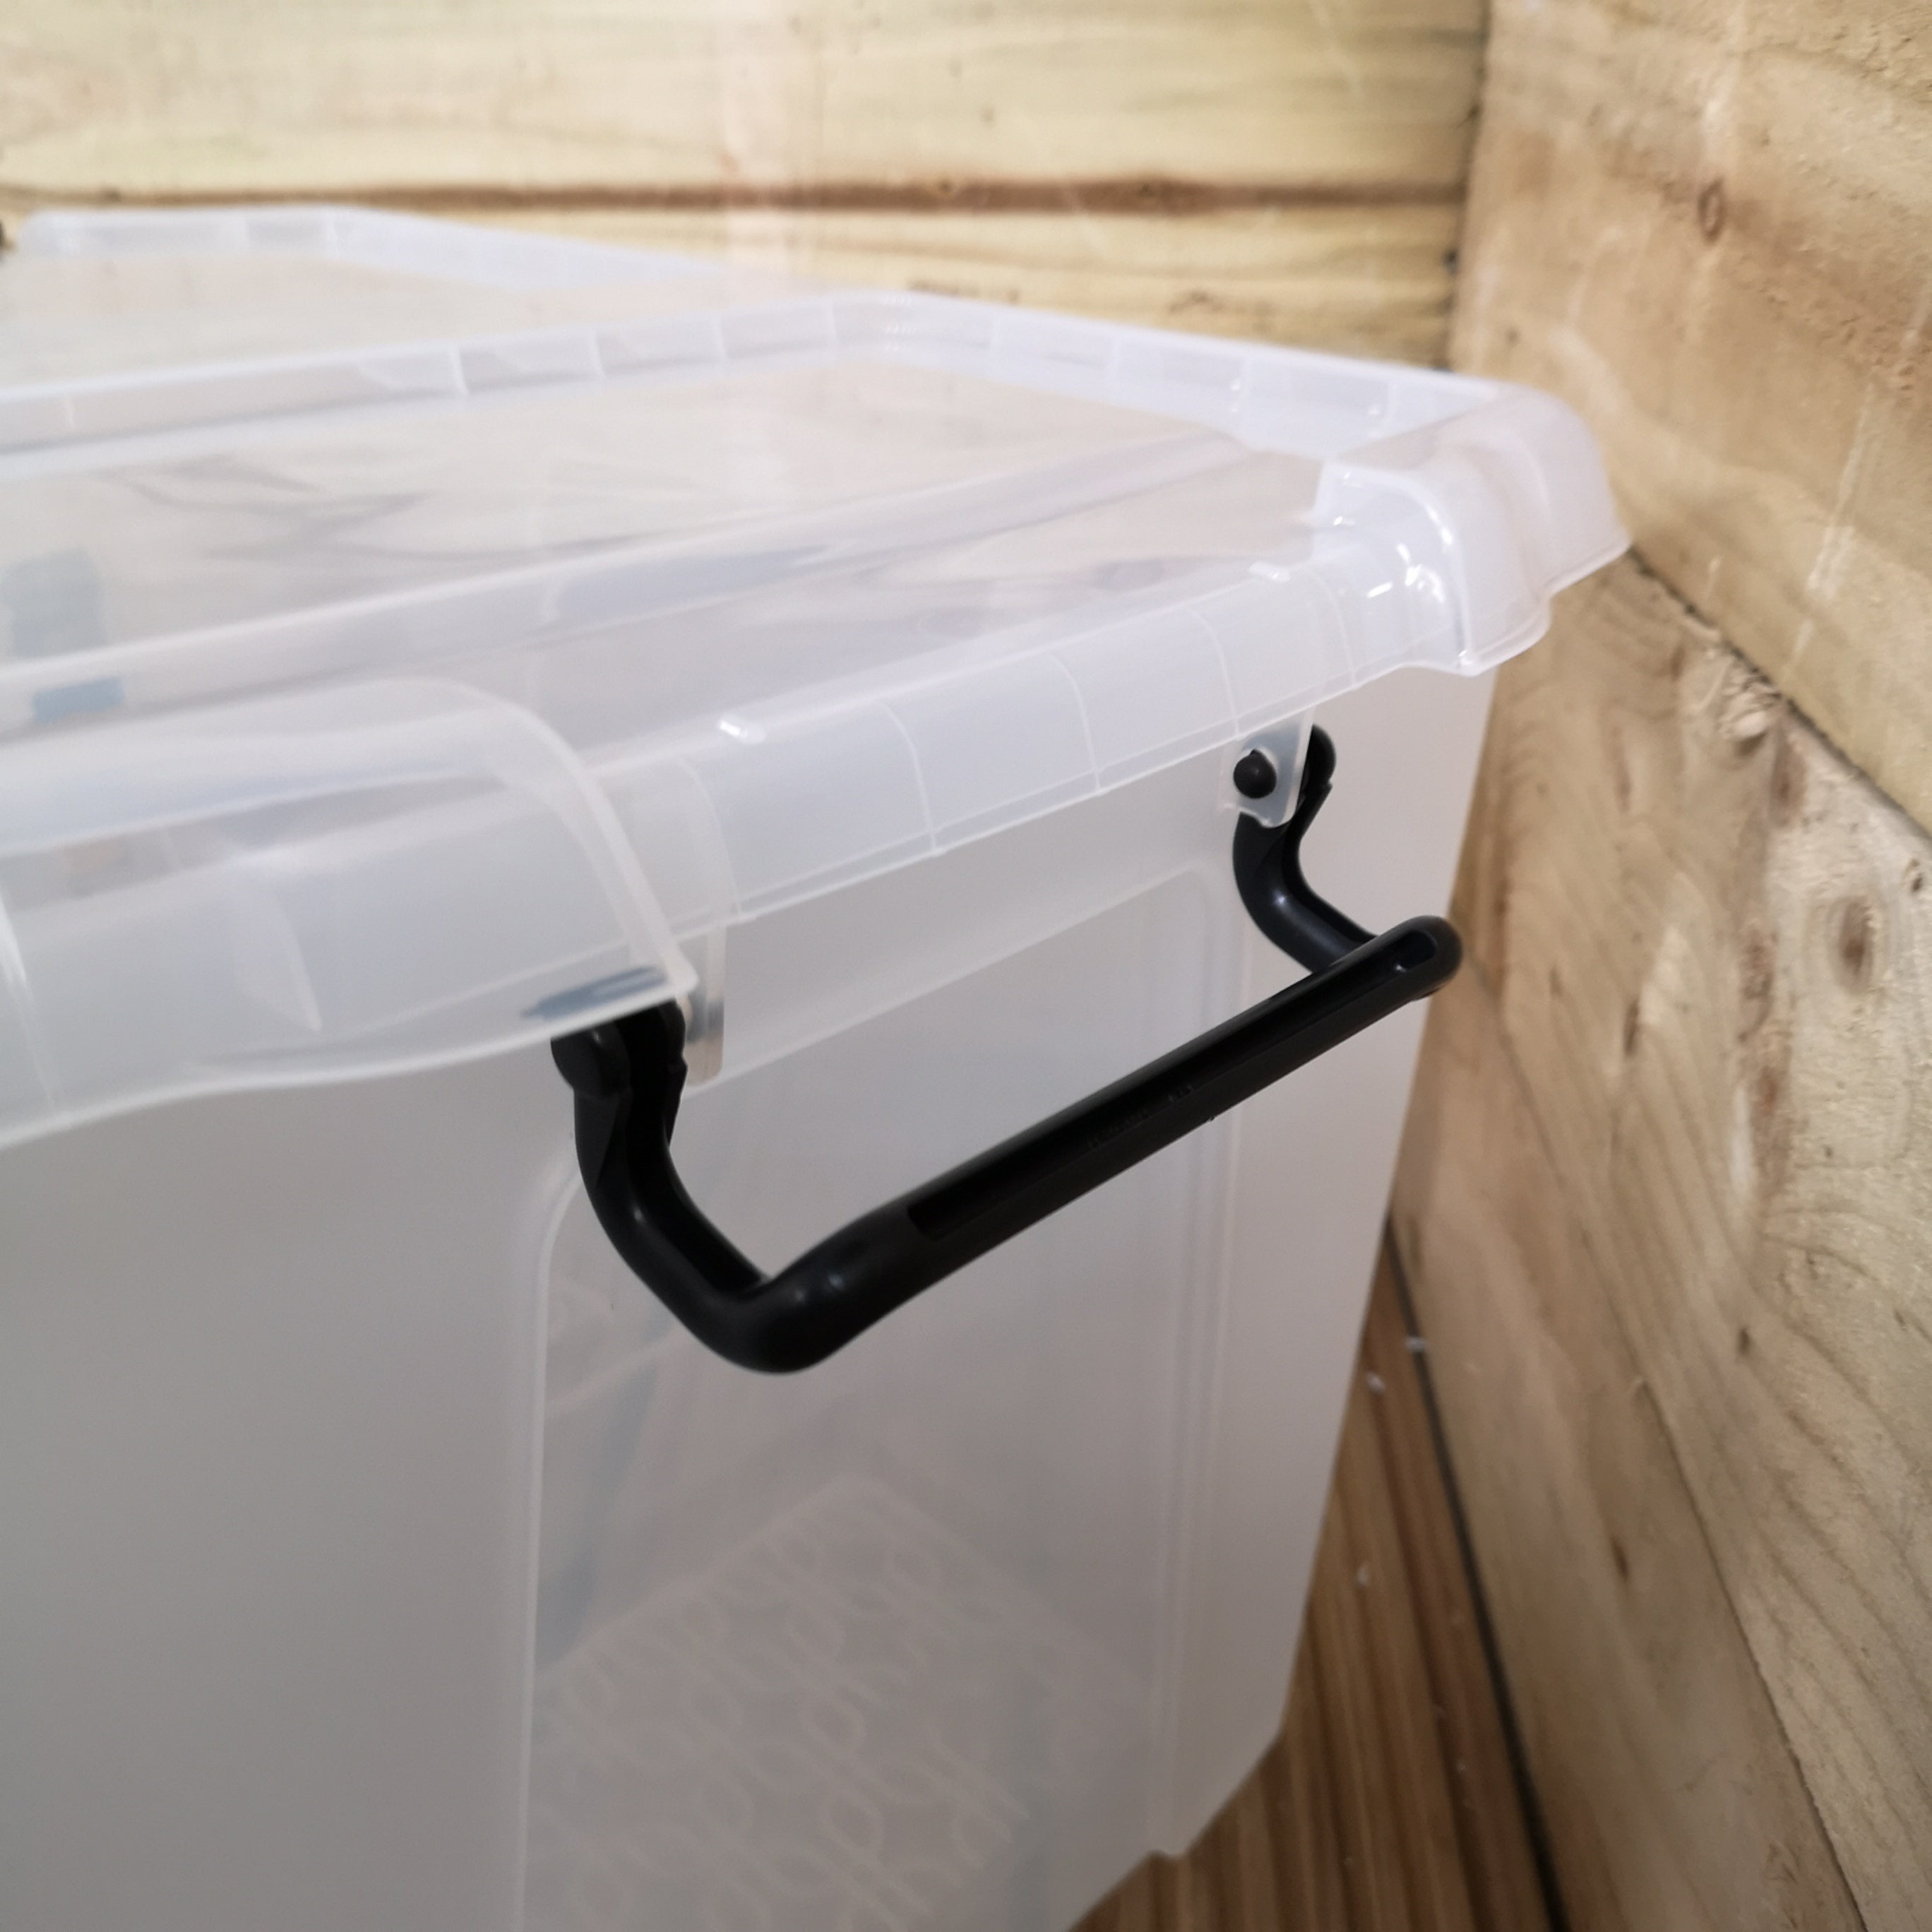 6 x 40L Smart Storage Box, Clear with Clear Extra Strong Lid, Stackable and Nestable Design Storage Solution